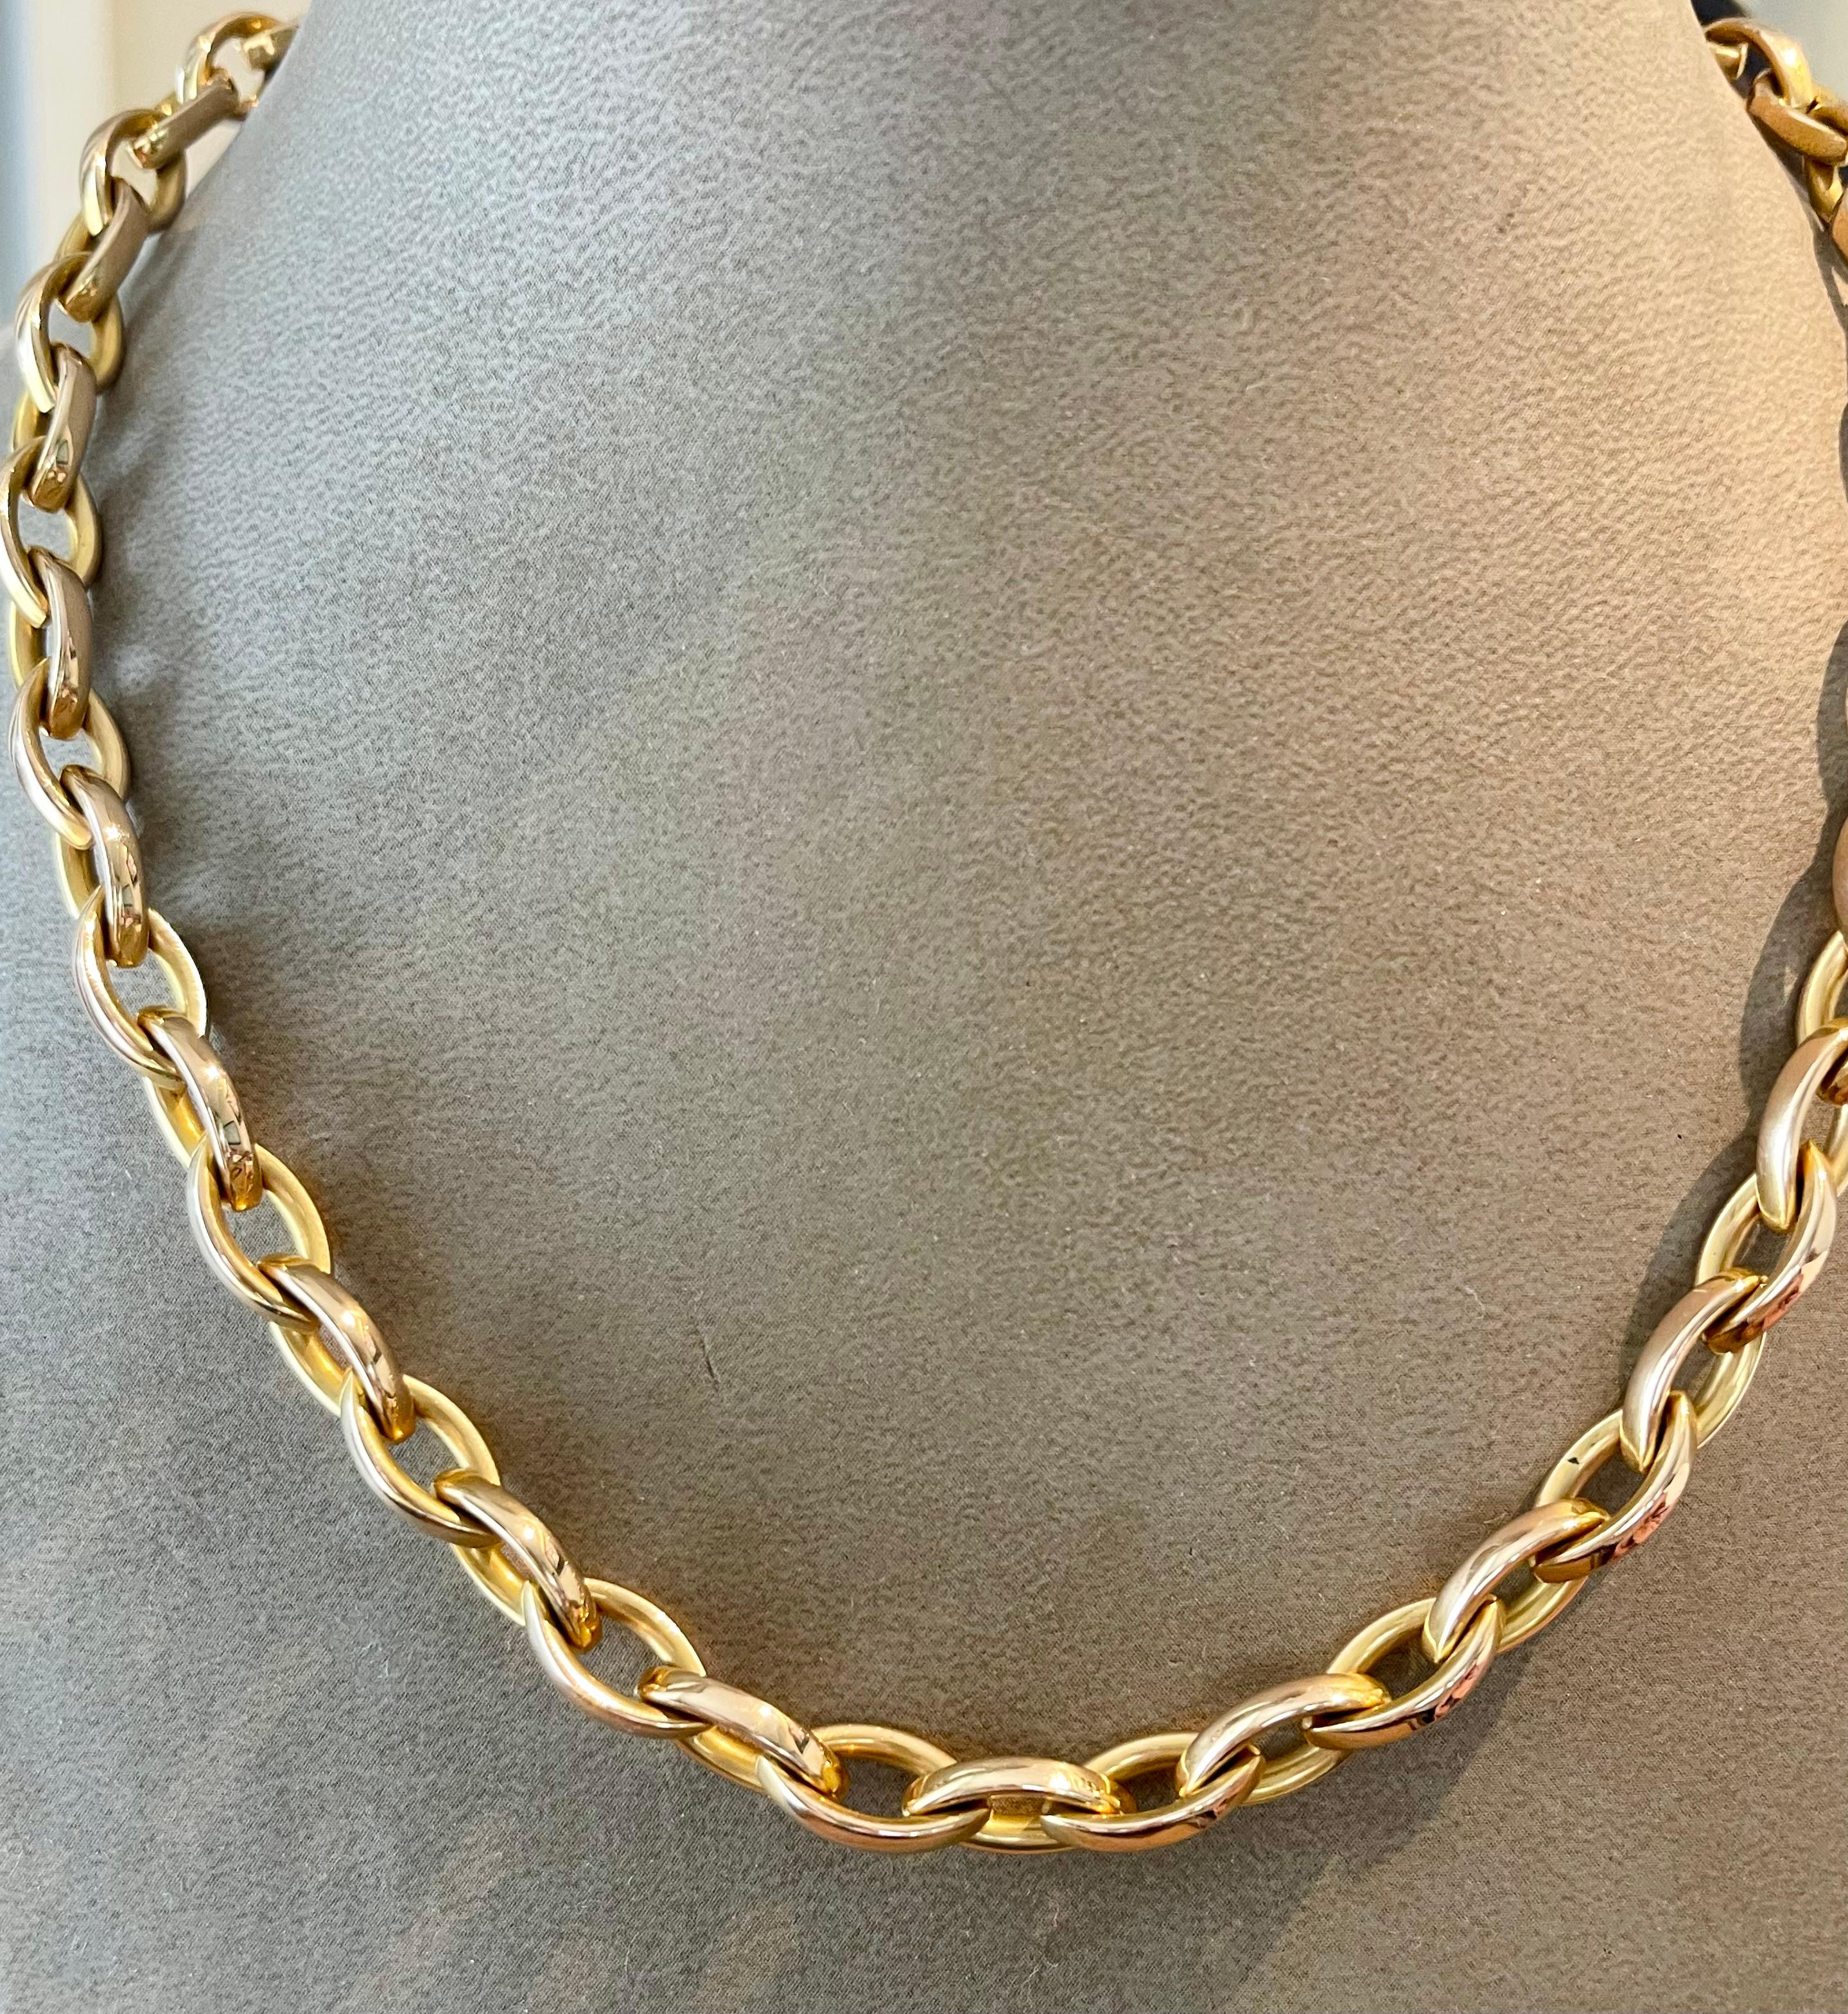 A timeless and modern 18 K rose Gold necklace made in Italy. 
Length: 46 cm. 
Weight: 32.36 grams. 
Dimension of individual link: 1.36 cm x 0.73 cm.
QUESTIONS?  Contact us right away if you have additional questions.  We are here to connect you with